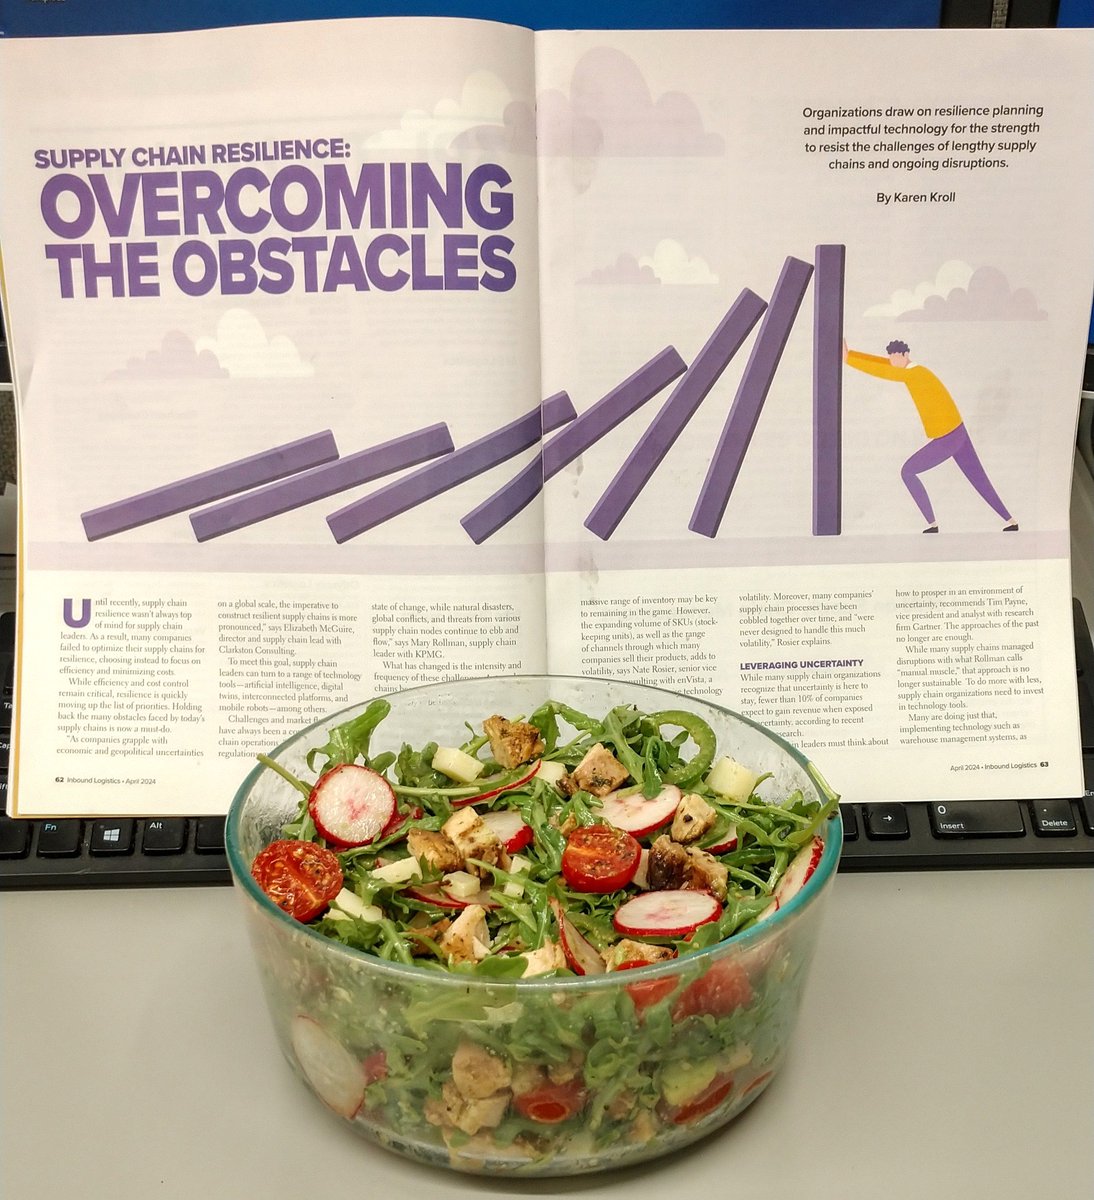 Eating my spicy salad and reading about overcoming supply chain obstacles--all about resilience bit.ly/ILMresilience via @ILMagazine #supplychain